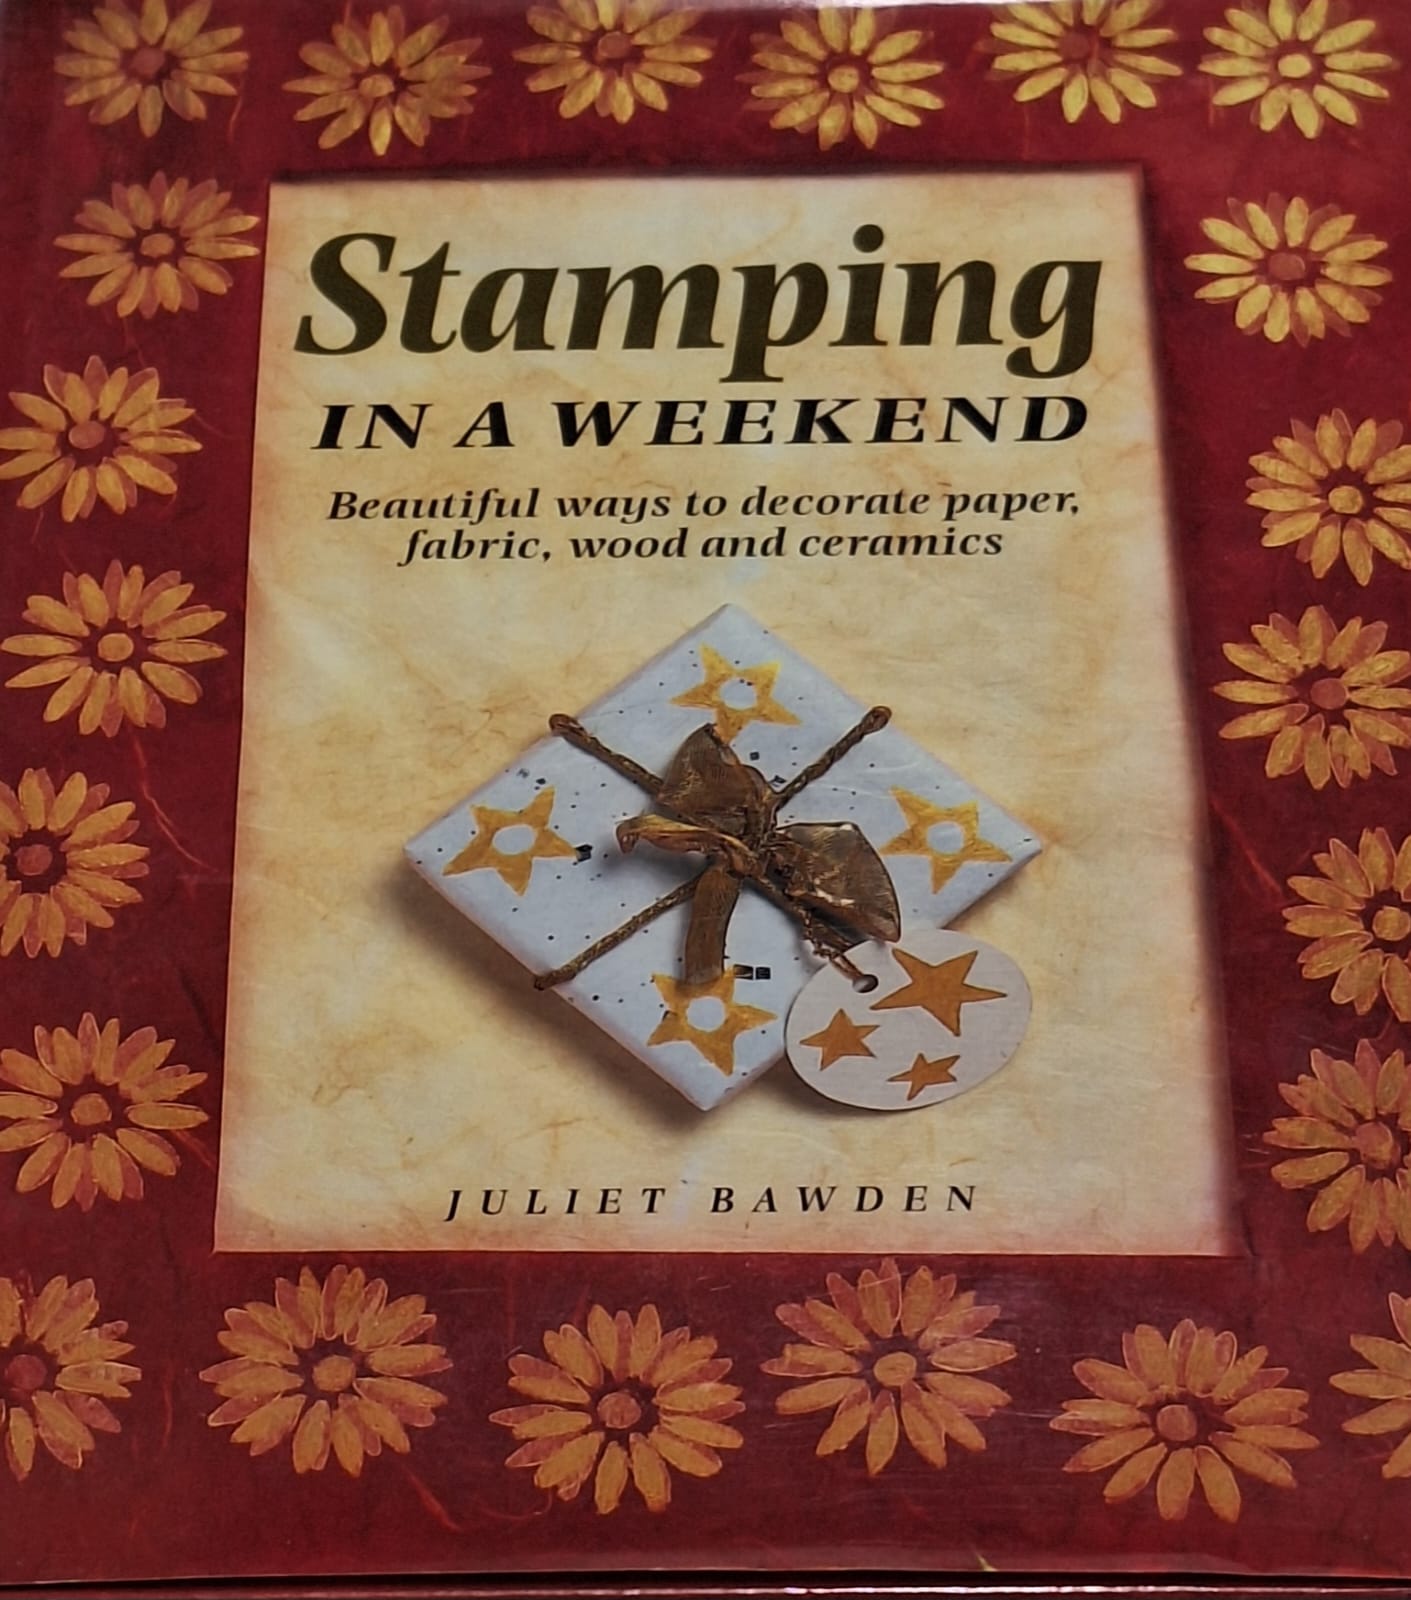 Bawden, Juliet - STAMPING IN A WEEKEND: BEAUTIFUL WAYS TO DECORATE PAPER, FABRIC, WOOD & CERAMICS